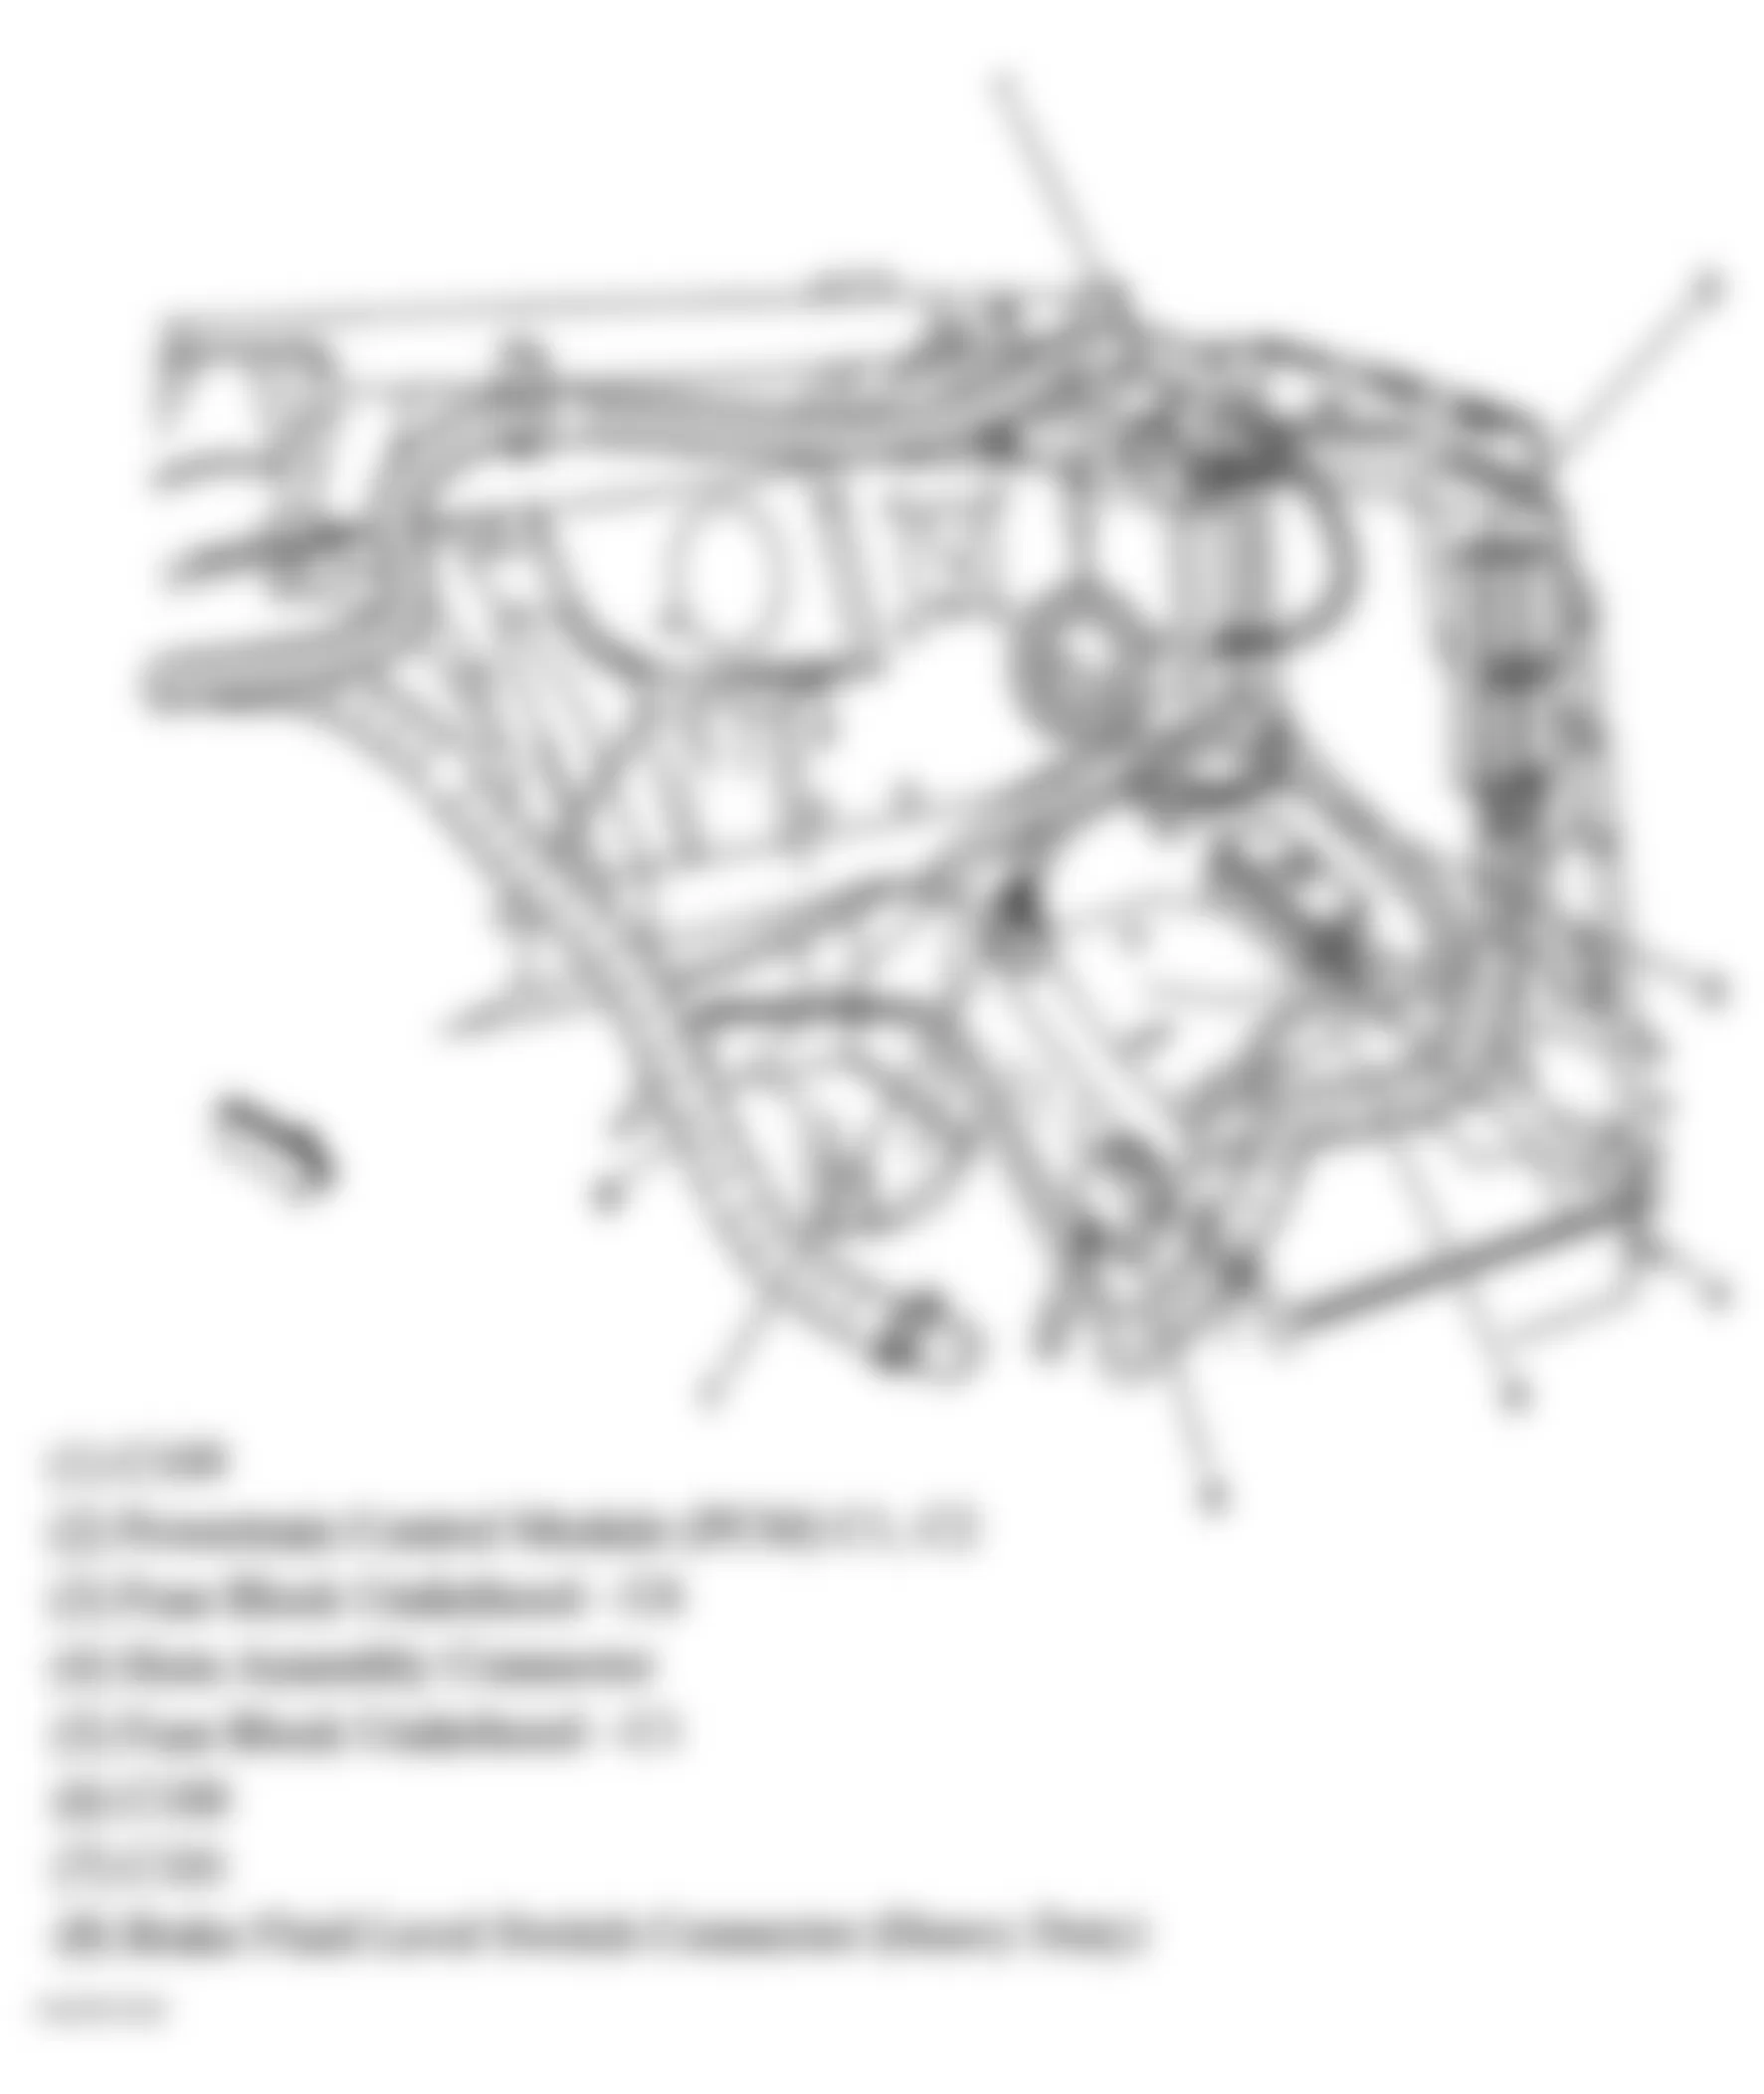 GMC Savana G2500 2006 - Component Locations -  Left Rear Of Engine Compartment